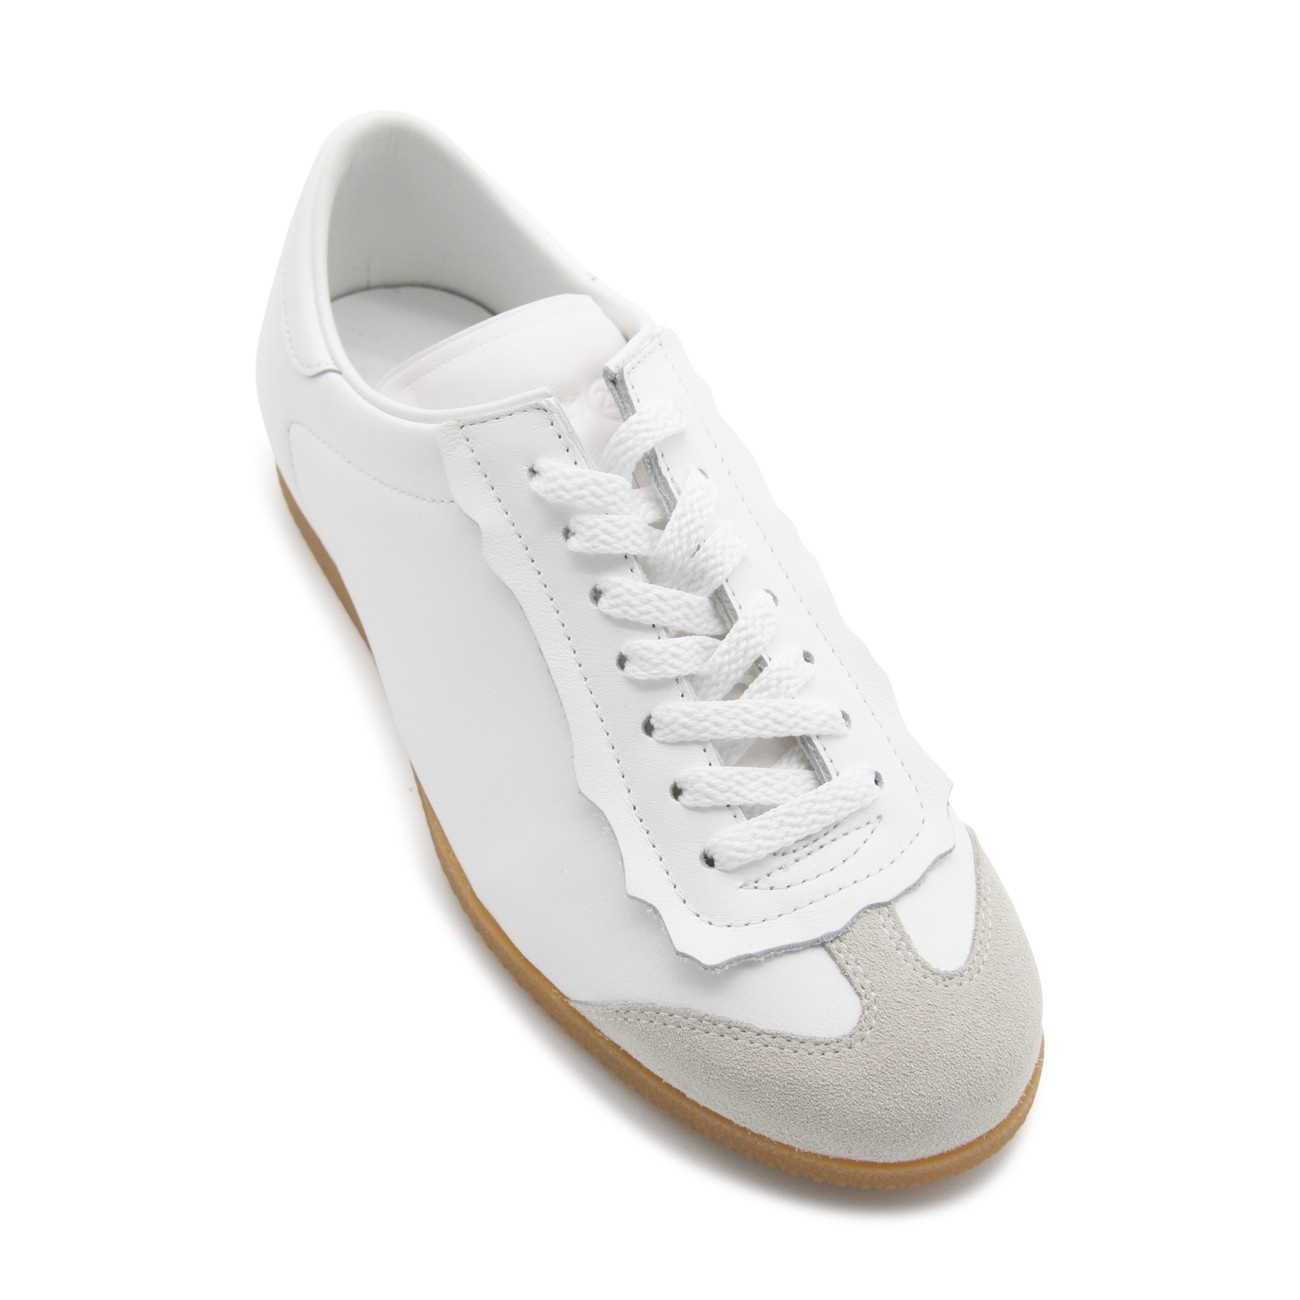 white leather and suede sneakers - 4